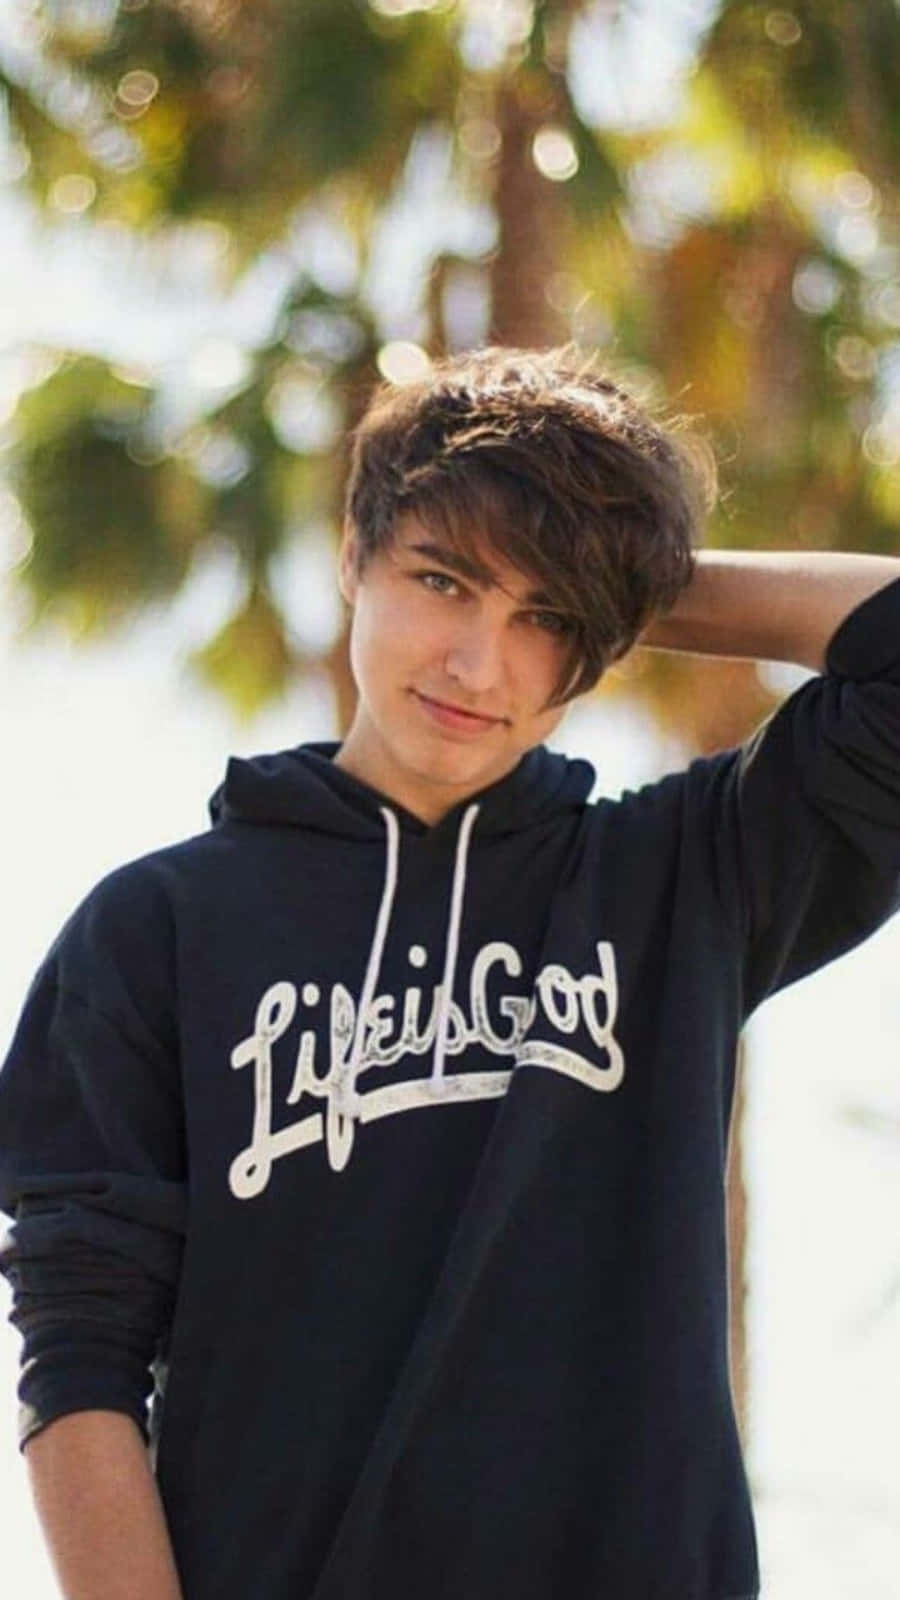 A Young Man Wearing A Black Hoodie With The Word Lifegod On It Wallpaper